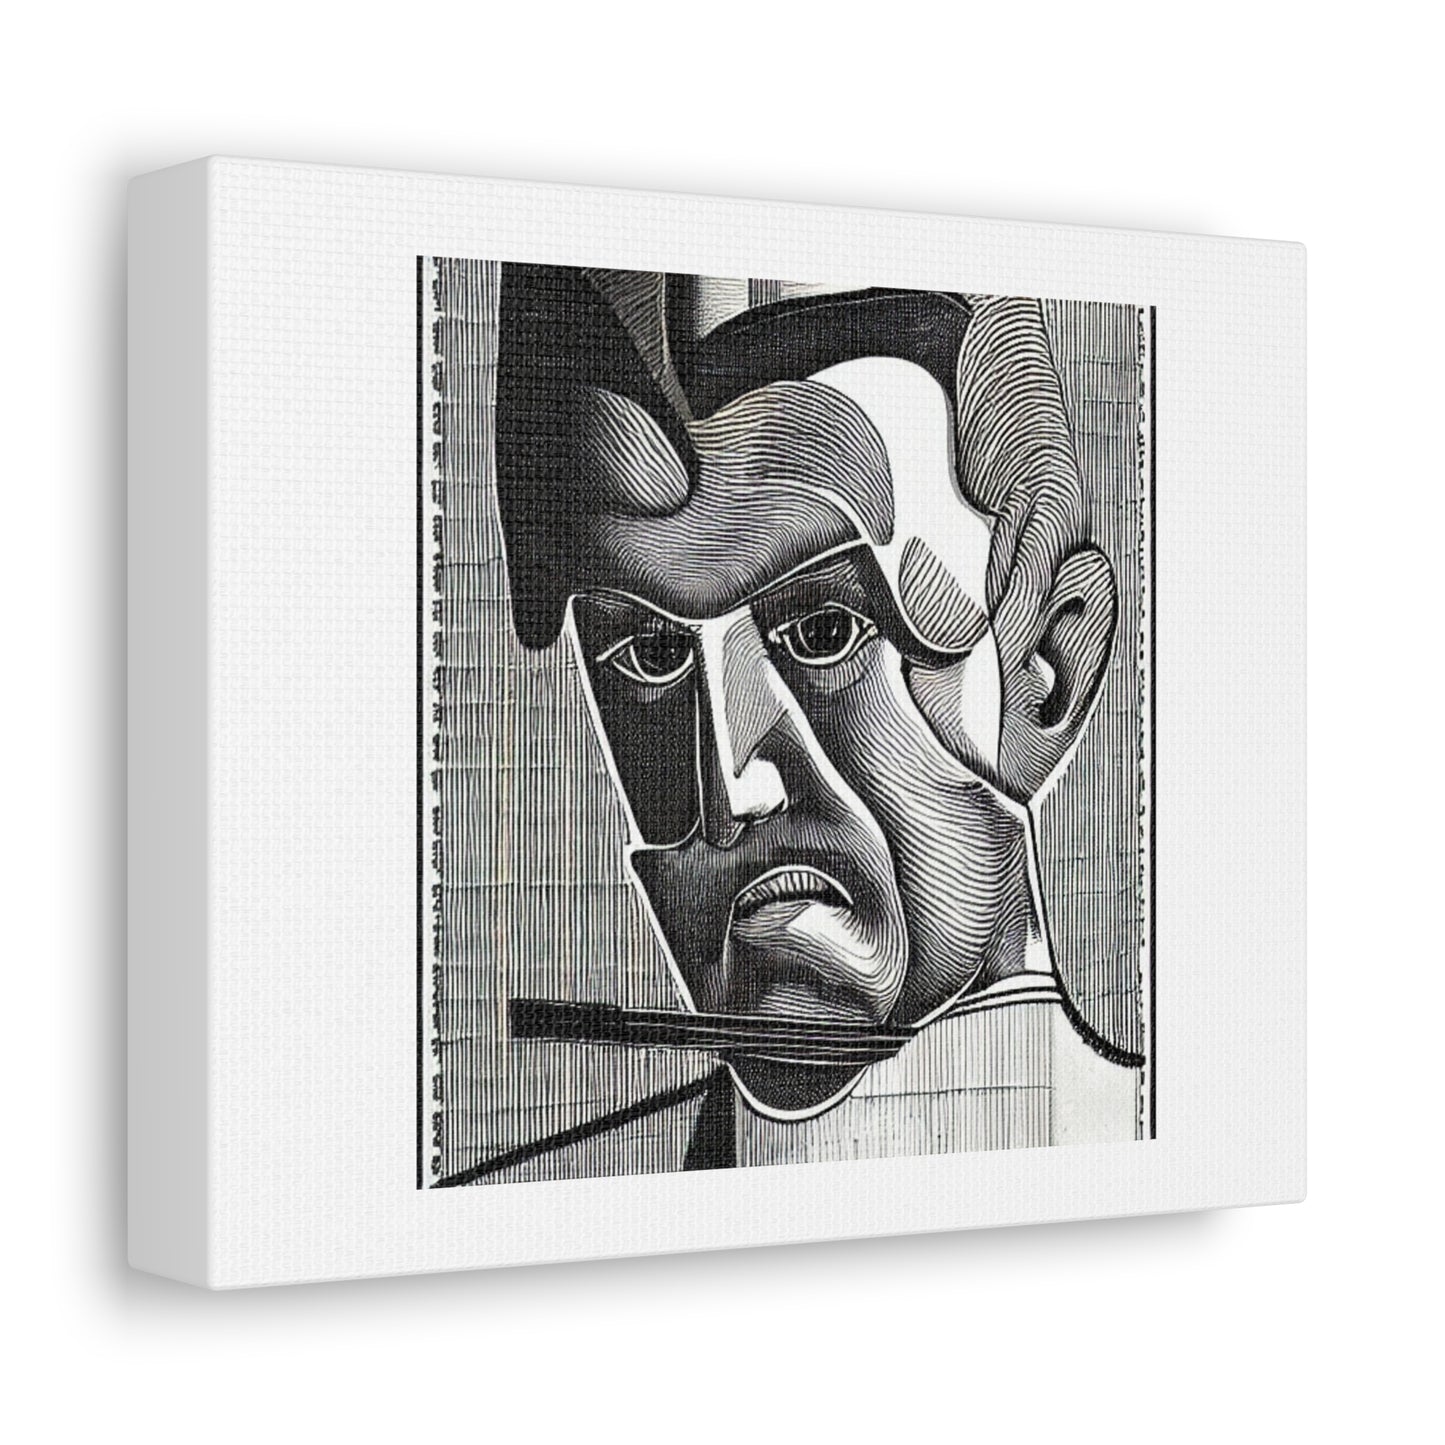 A Hot Man Portrait Line Drawing 'Designed by AI' on Canvas